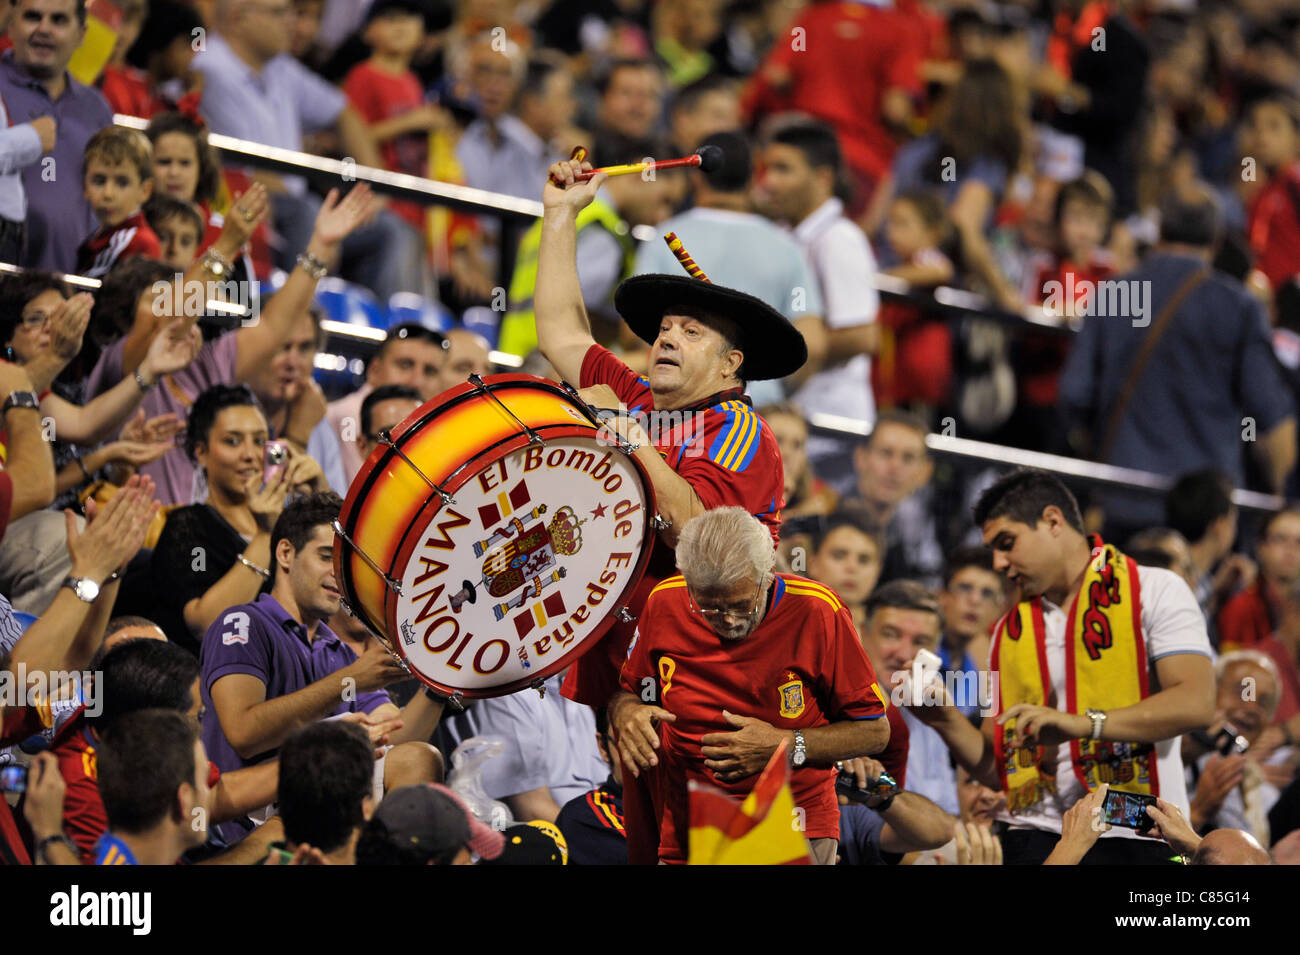 Manolo, mascot of the spanish national team during the Euro 2012 qualification match between Spain and Scotland (3:1) in Rico Perez Stadium in Alicante, Spain Stock Photo